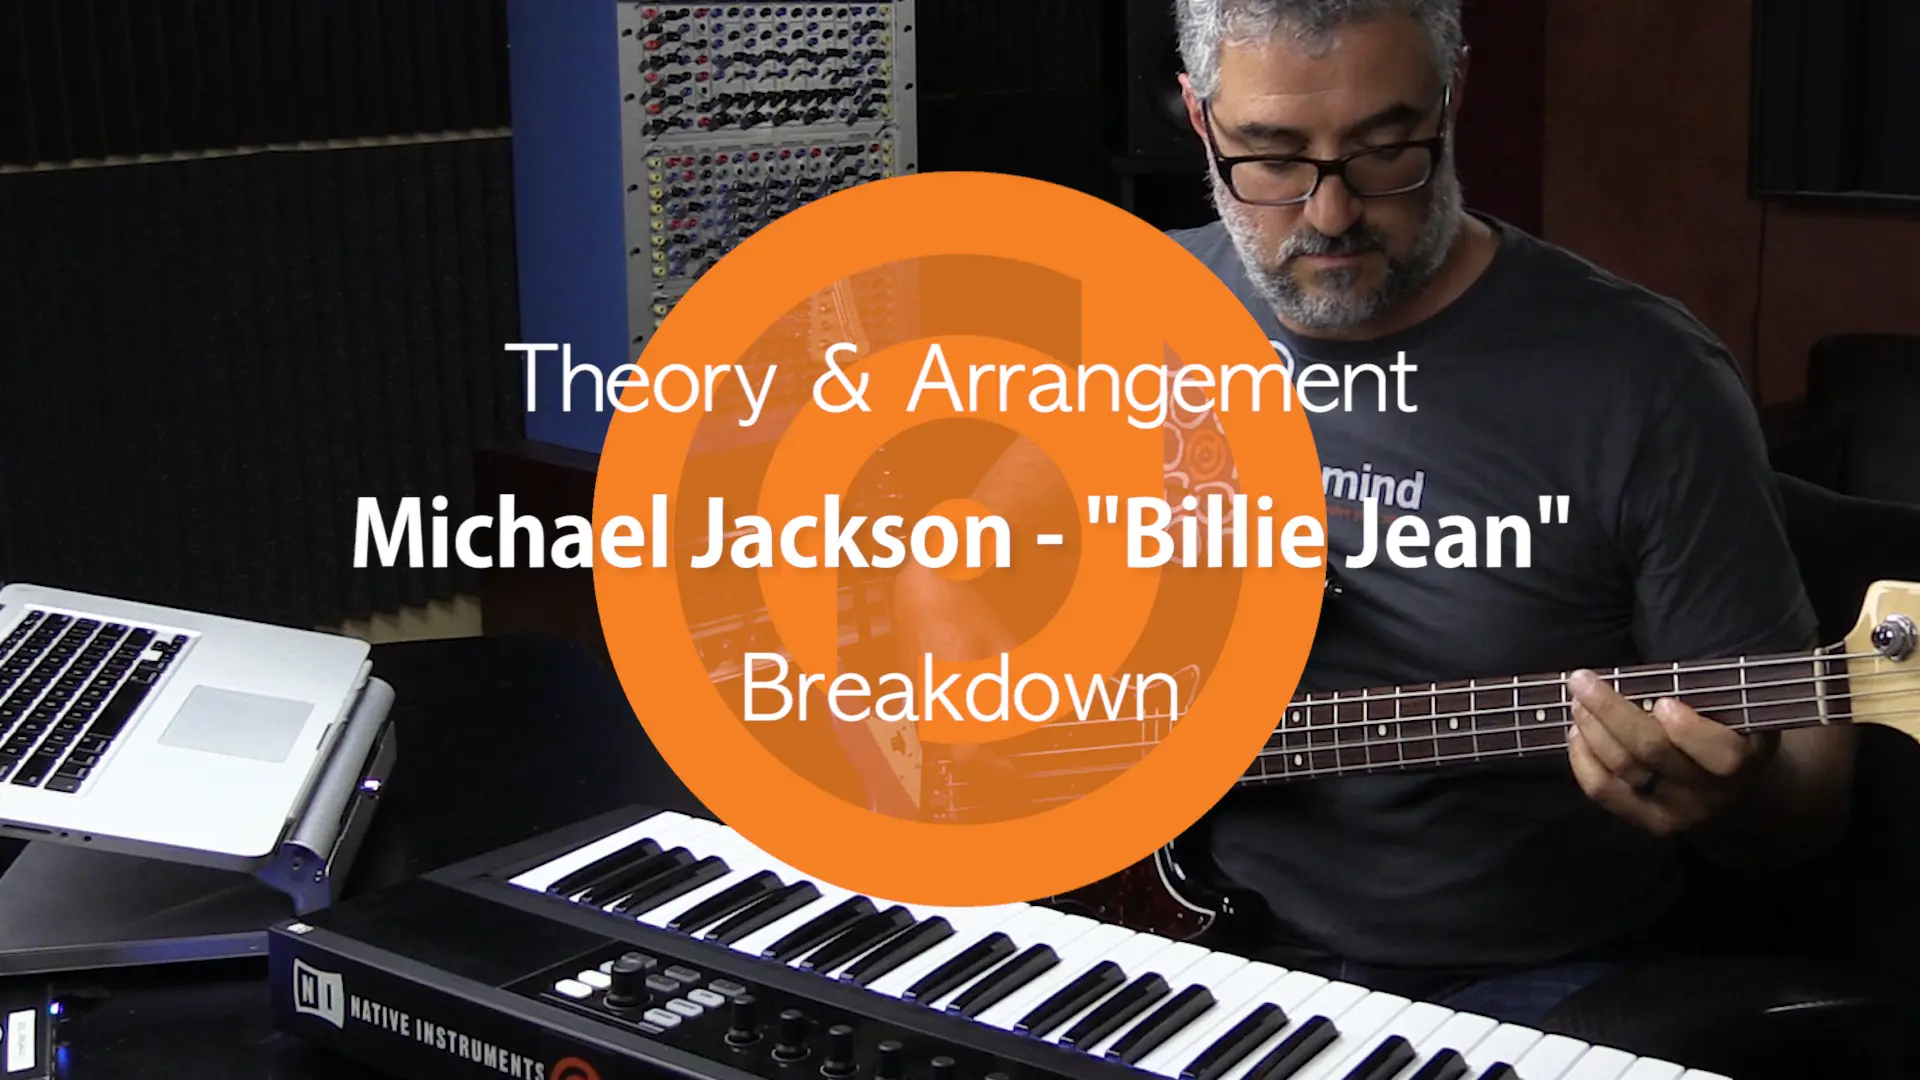 Explore the theory and arrangement behind Michael Jackson's iconic hit "Billie Jean" with a breakdown that delves into the music producer's expertise.